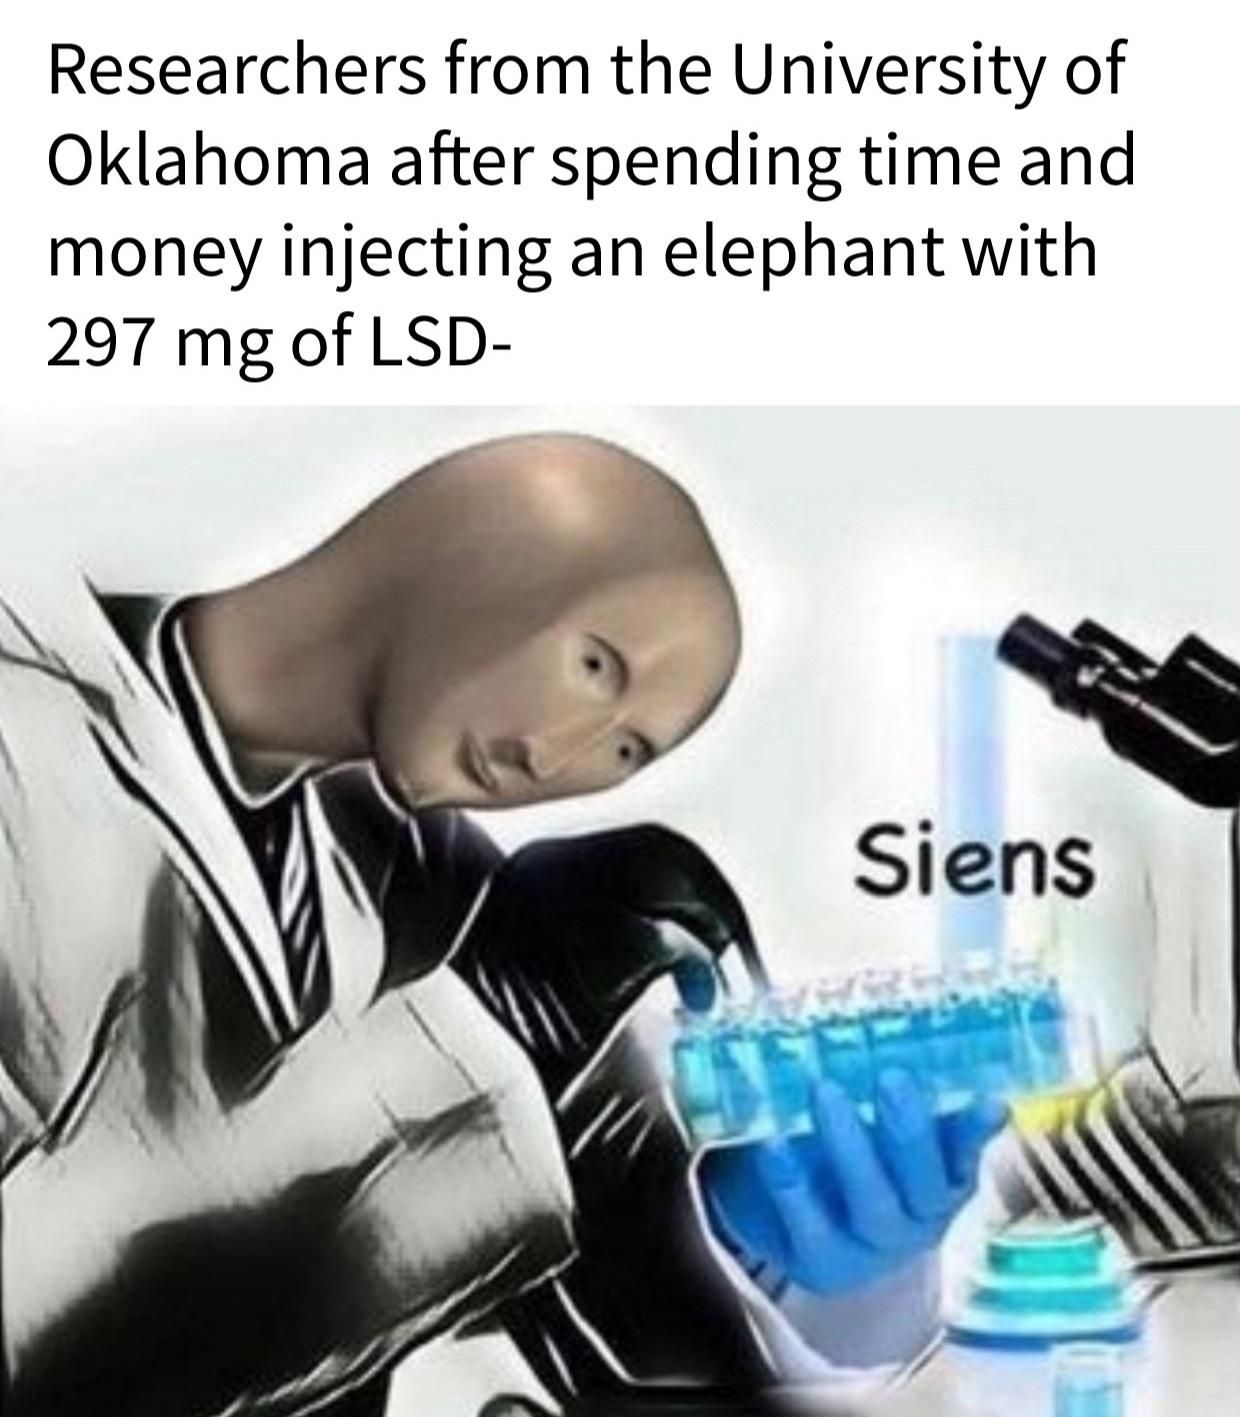 "Hmm. Elephants respond badly to massive doses of LSD...fascinating."